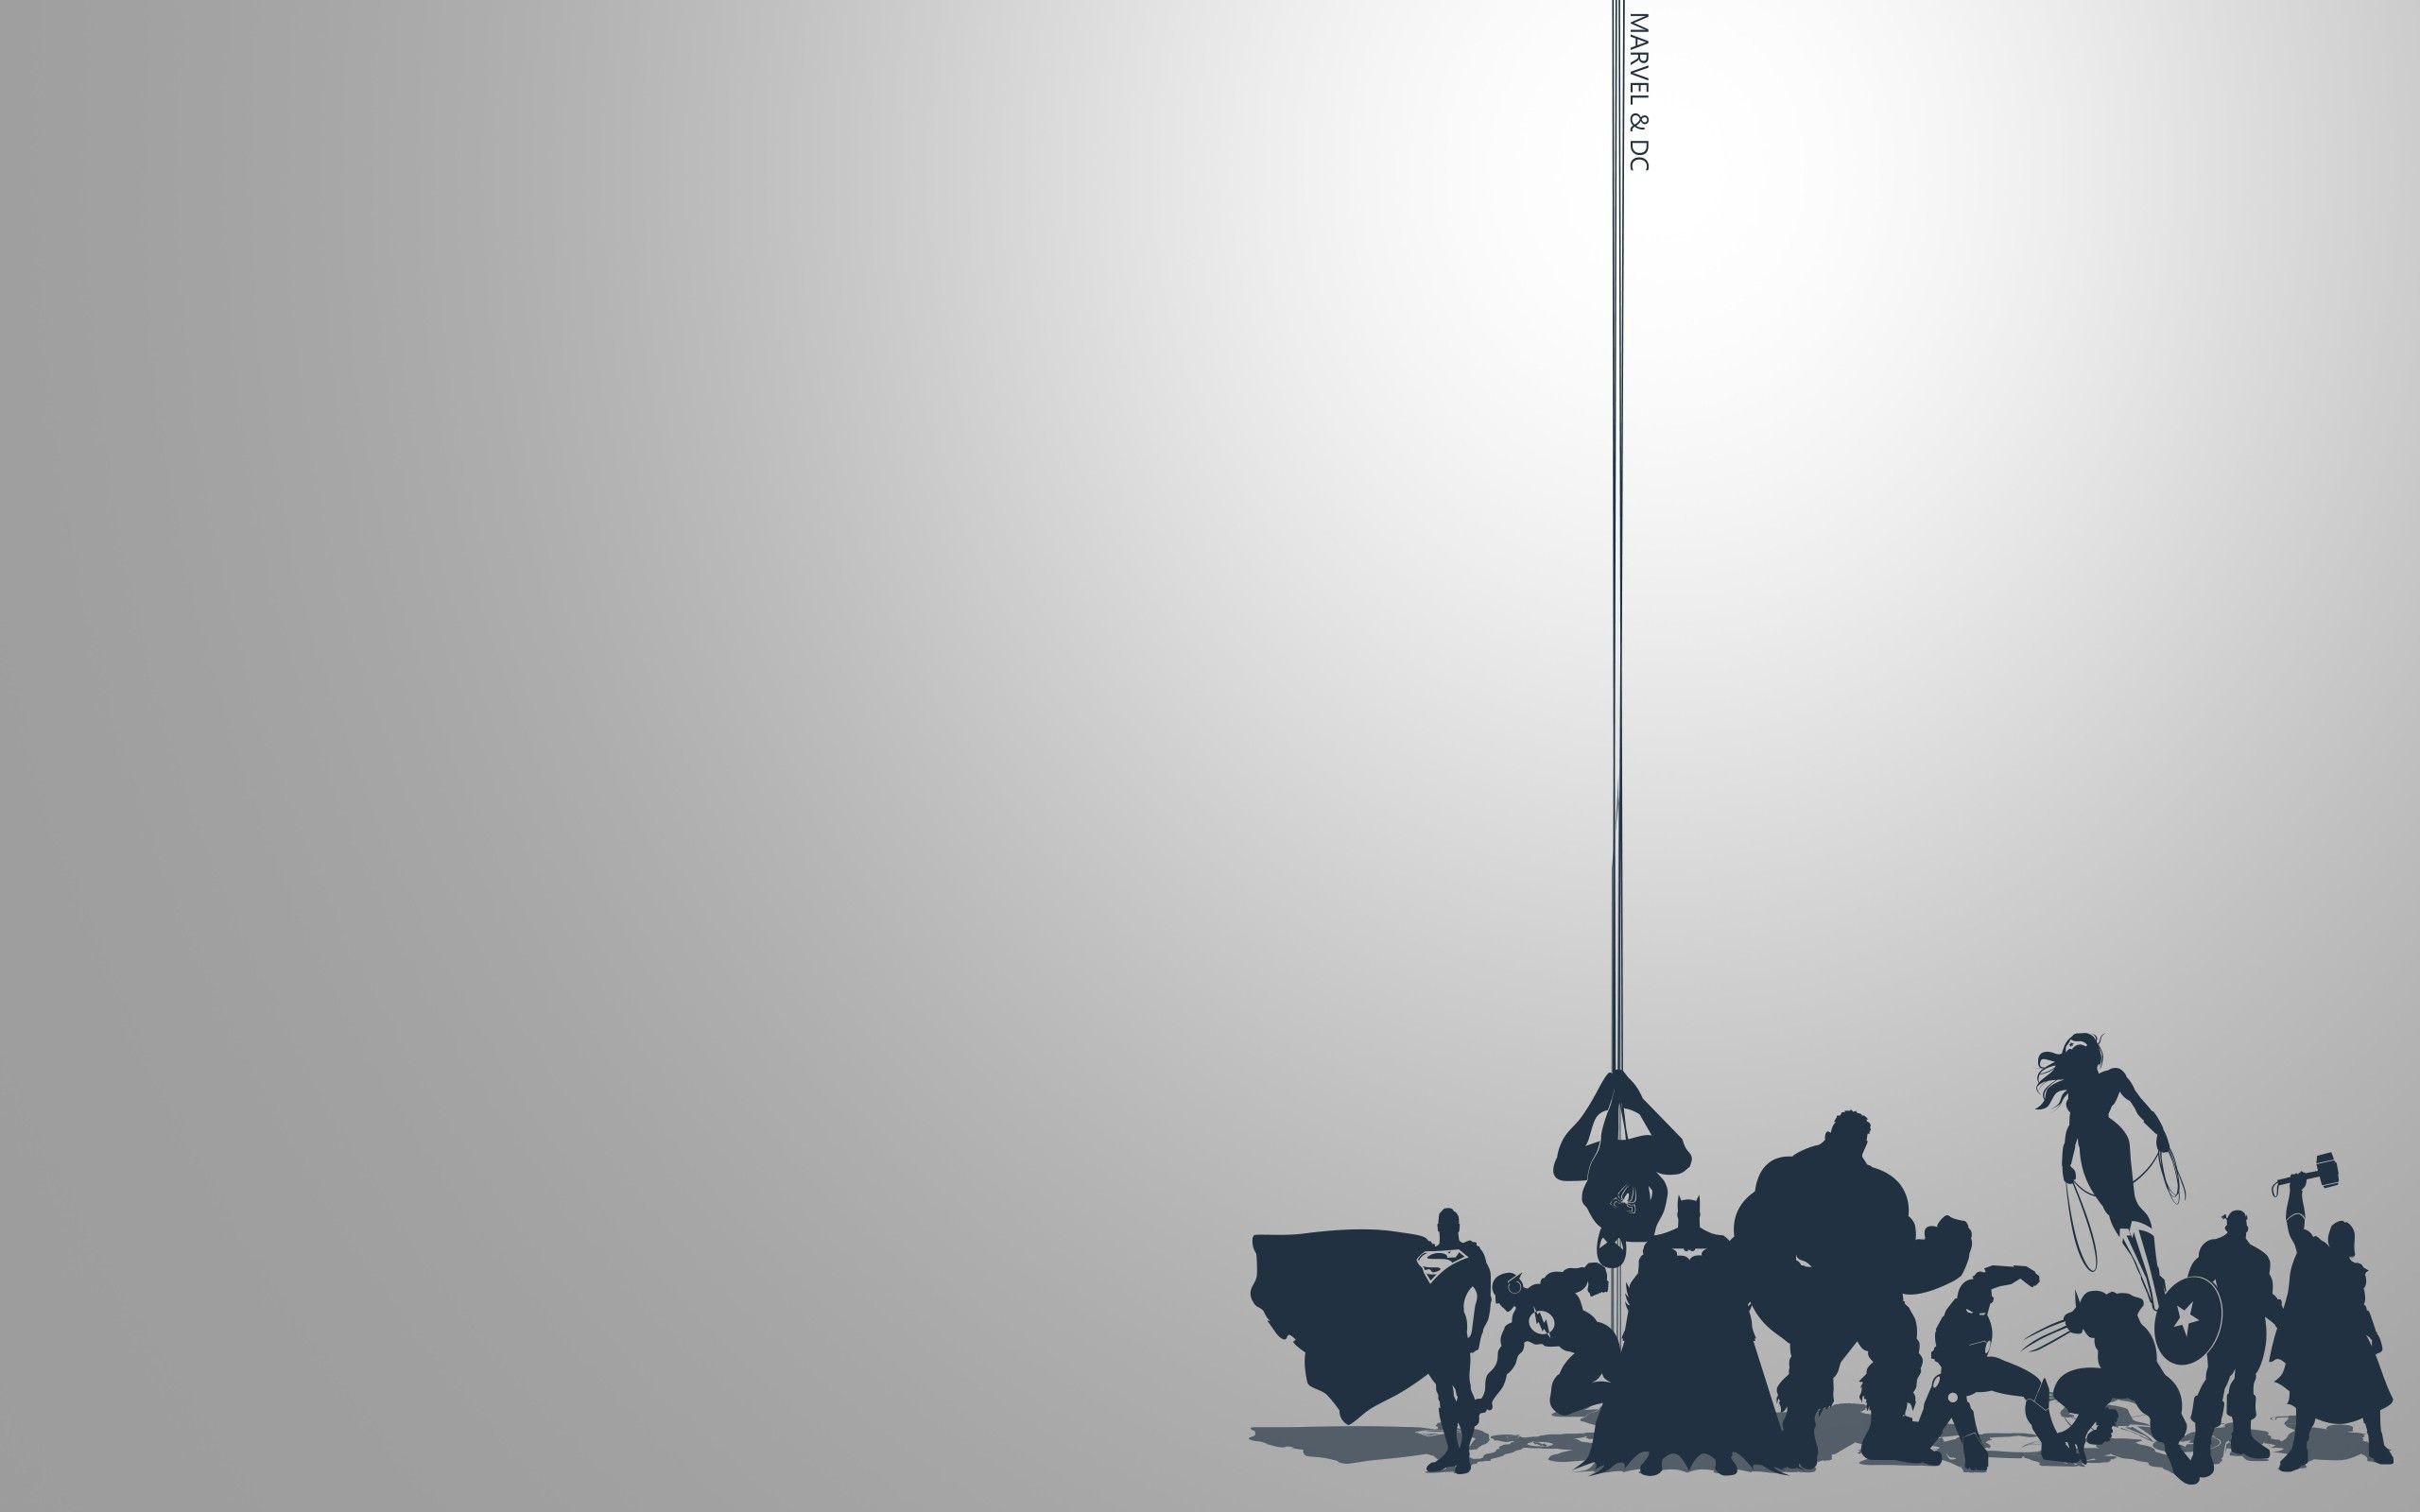 Minimalist The Avengers wallpaper for your PC, mobile phone, iPad, iPhone. - Marvel